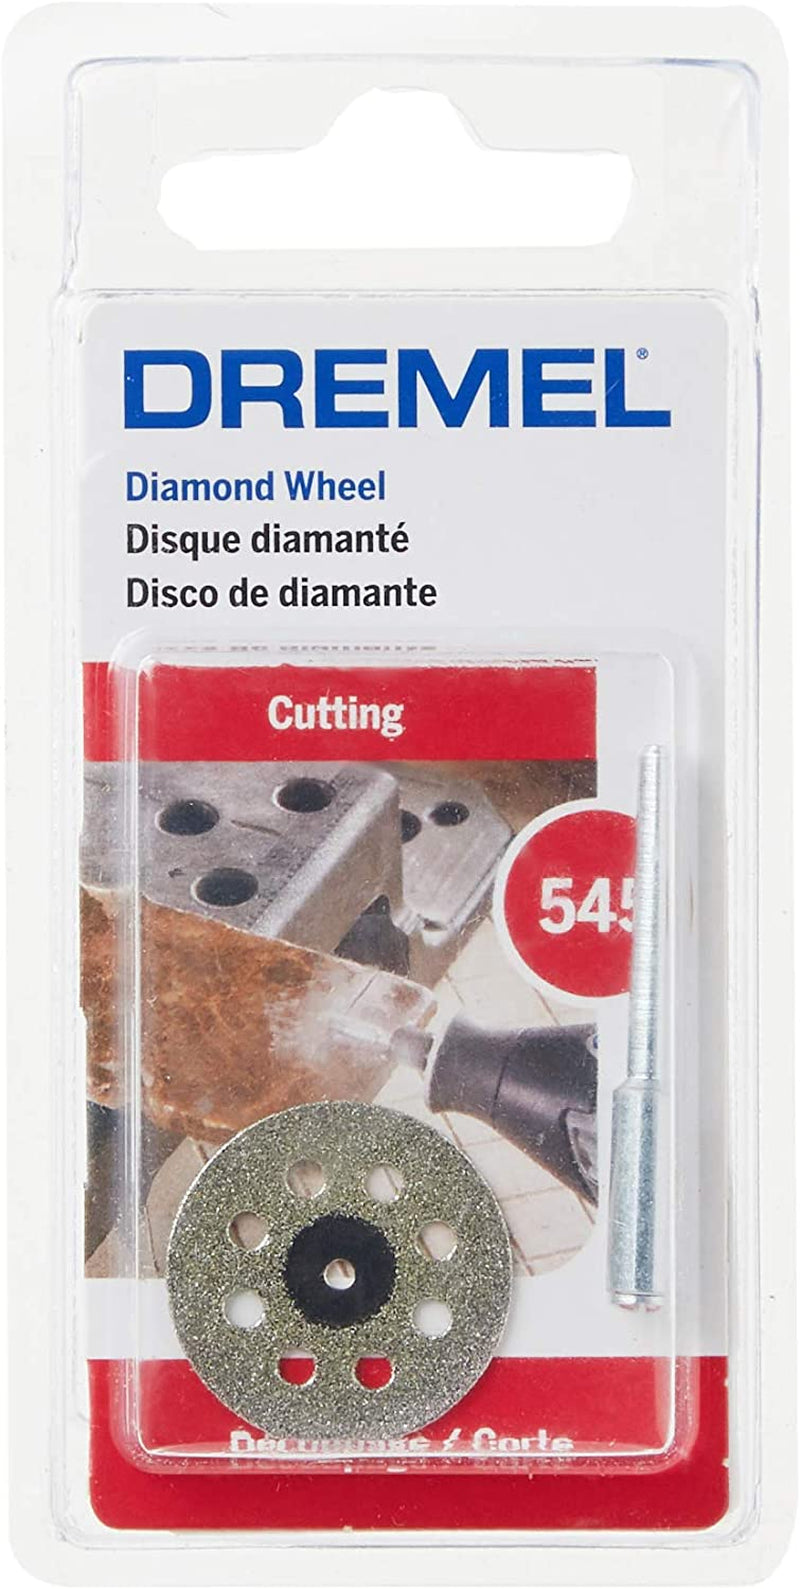 Dremel 545 Diamond Cutting Wheel, Rotary Tool Accessory with 38Mm Cutting Diameter for Cutting Hard Materials